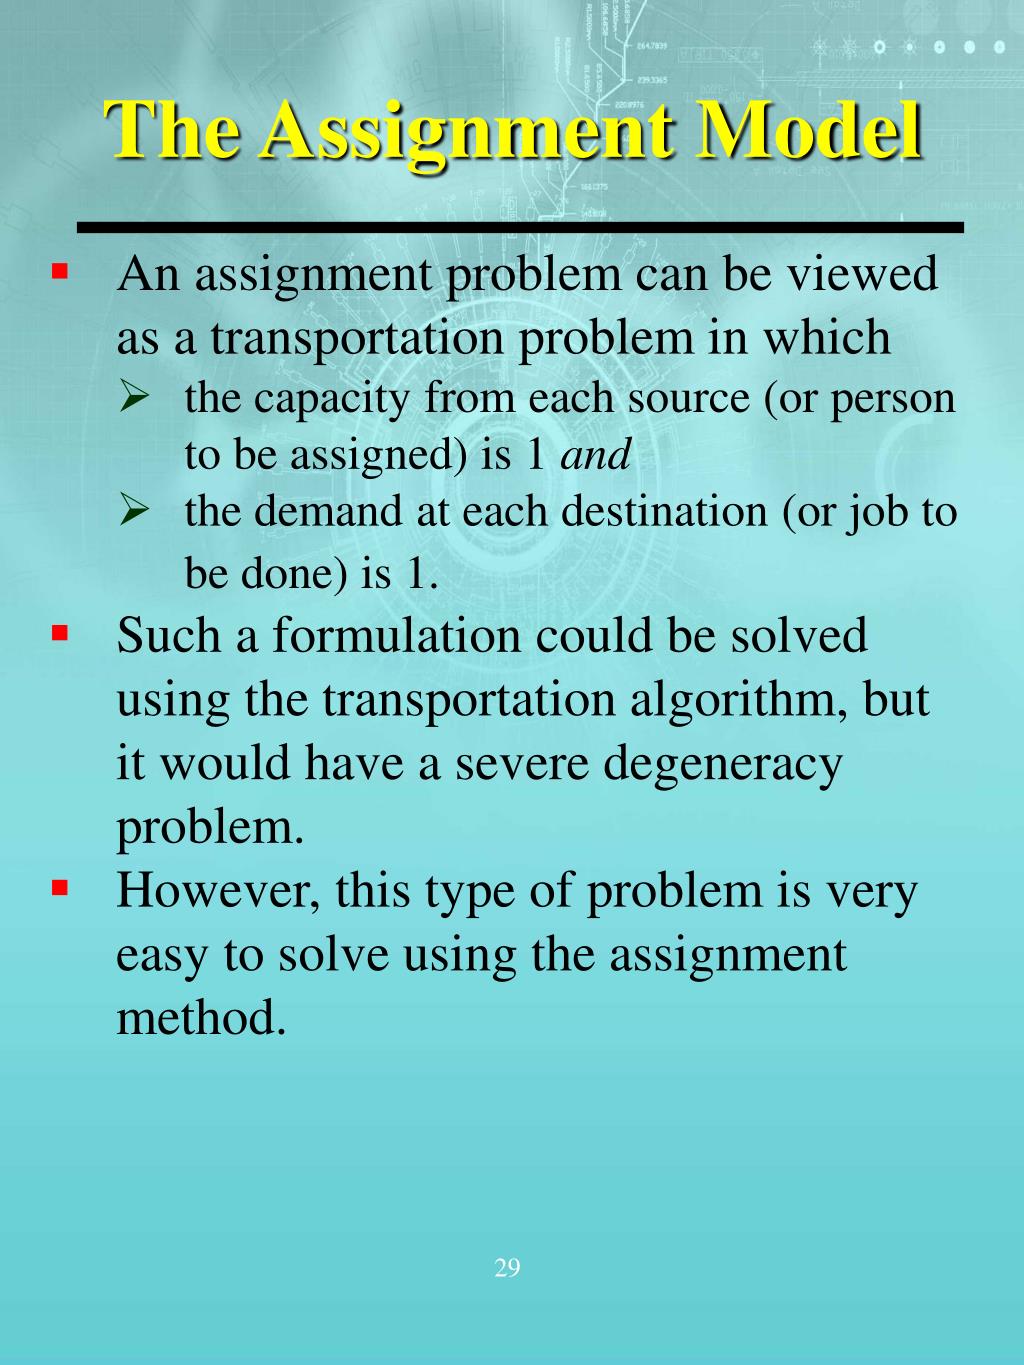 assignment model can be